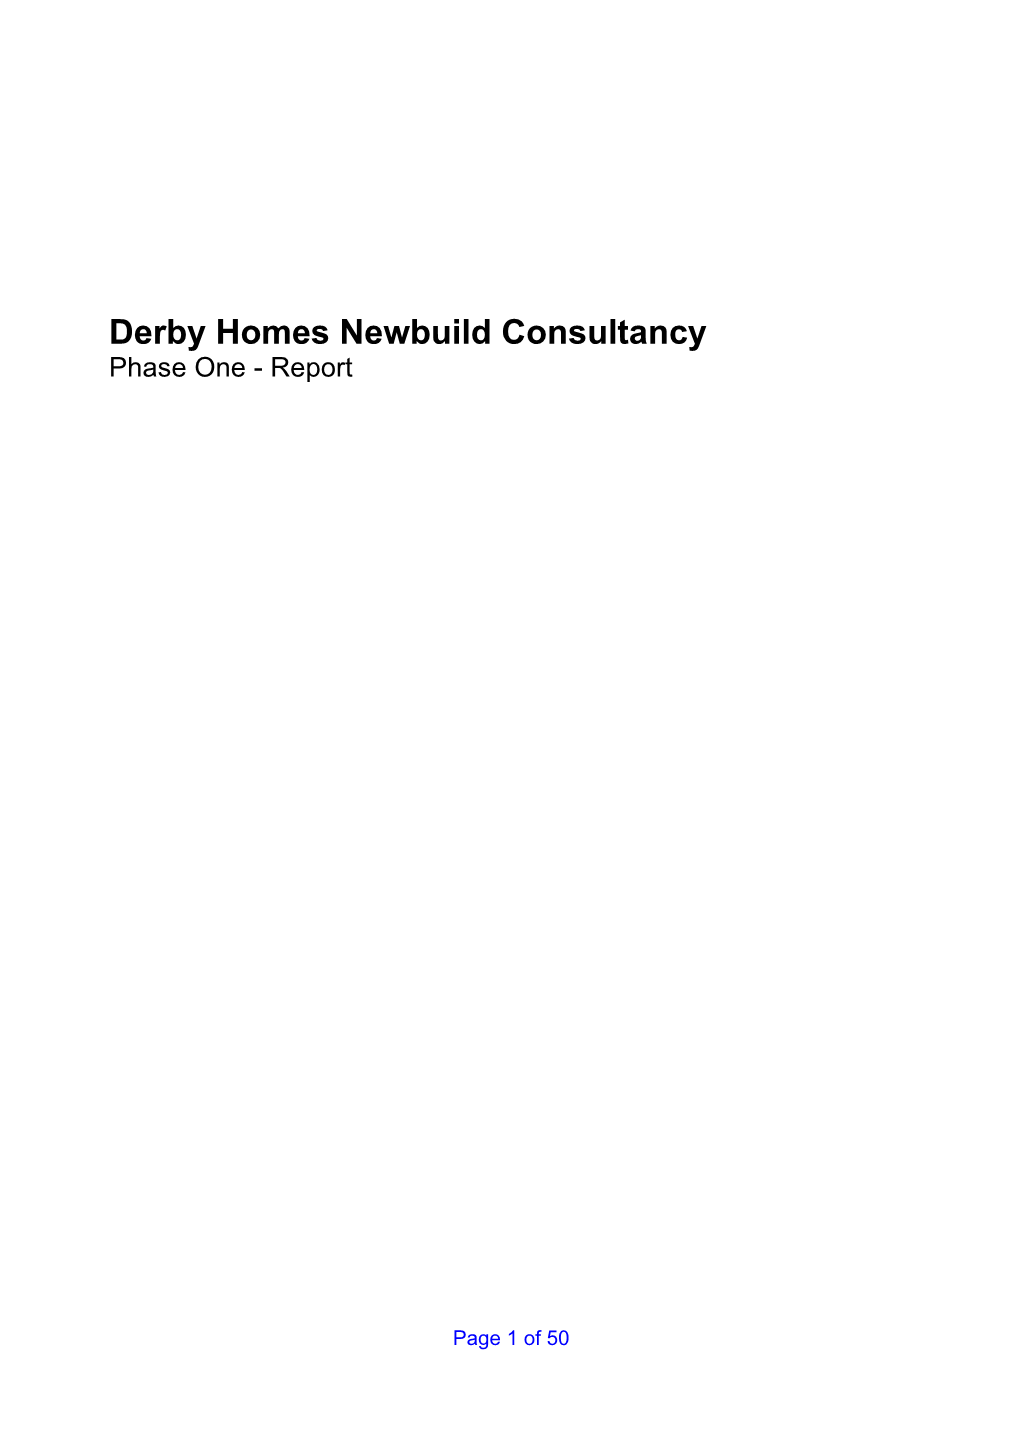 Derby Homes Newbuild Consultancy Phase One - Report